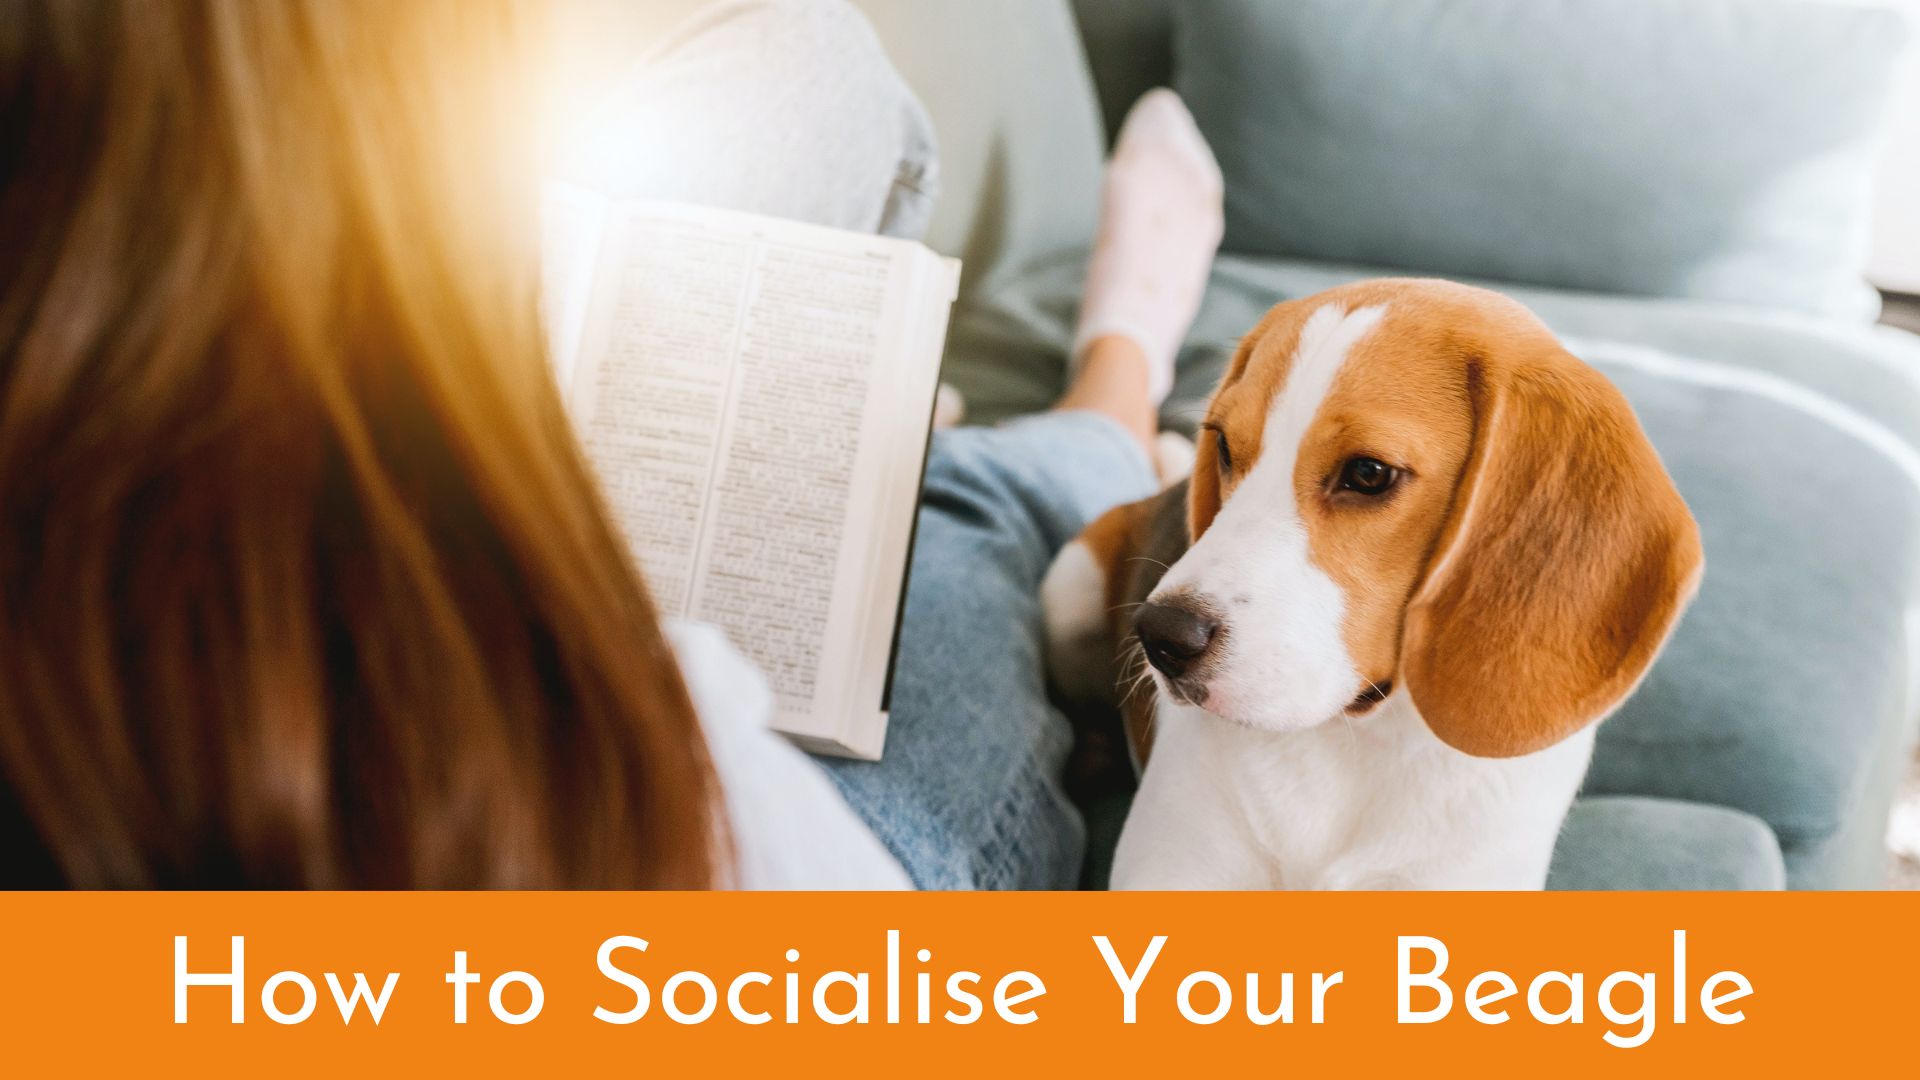 How to Socialise Your Beagle in 5 Simple Steps